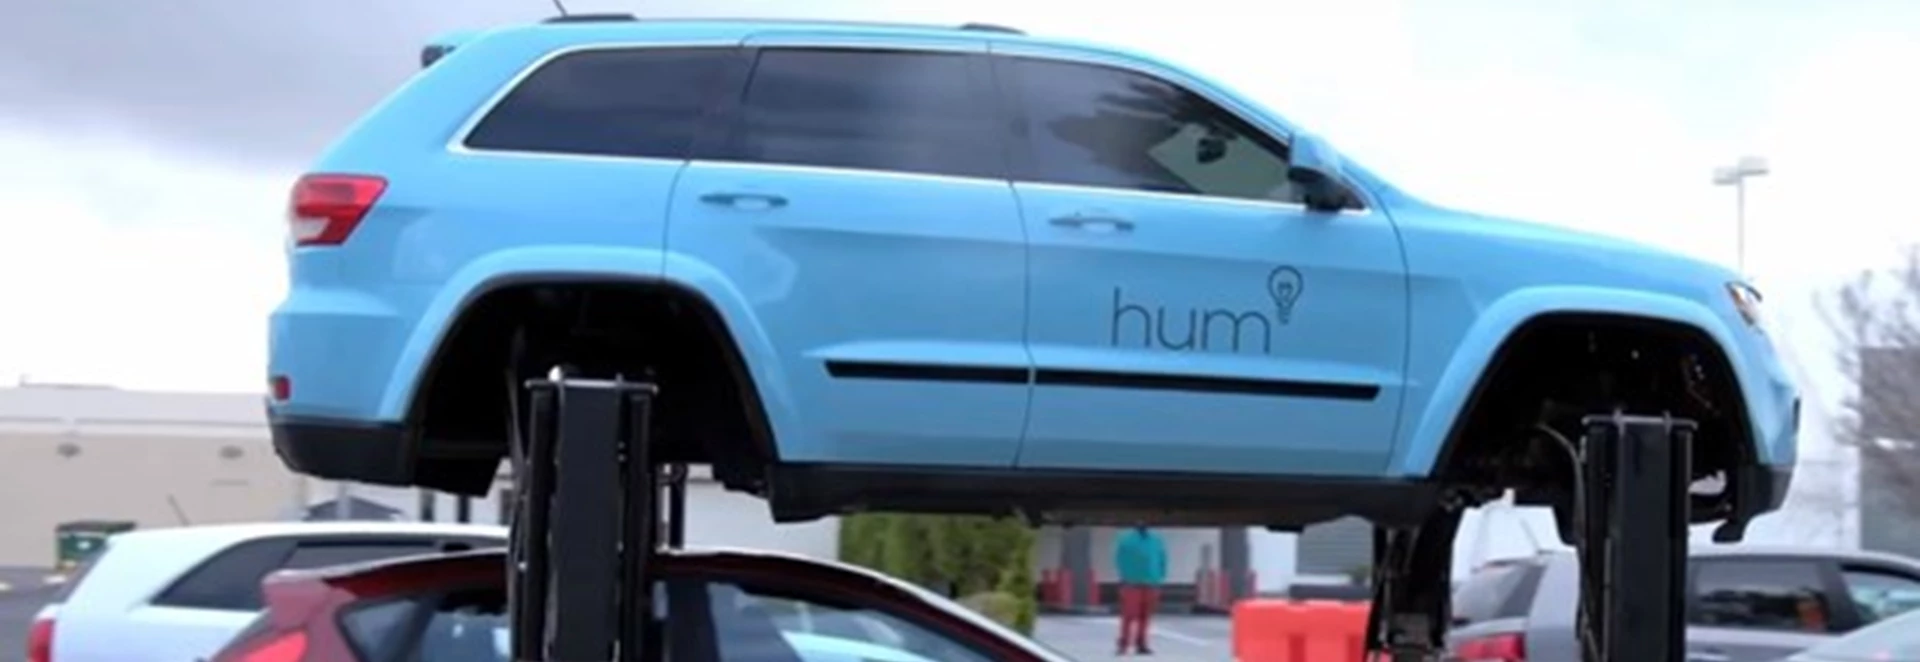 Hum Rider car with extendable ‘legs’ can walk over traffic 